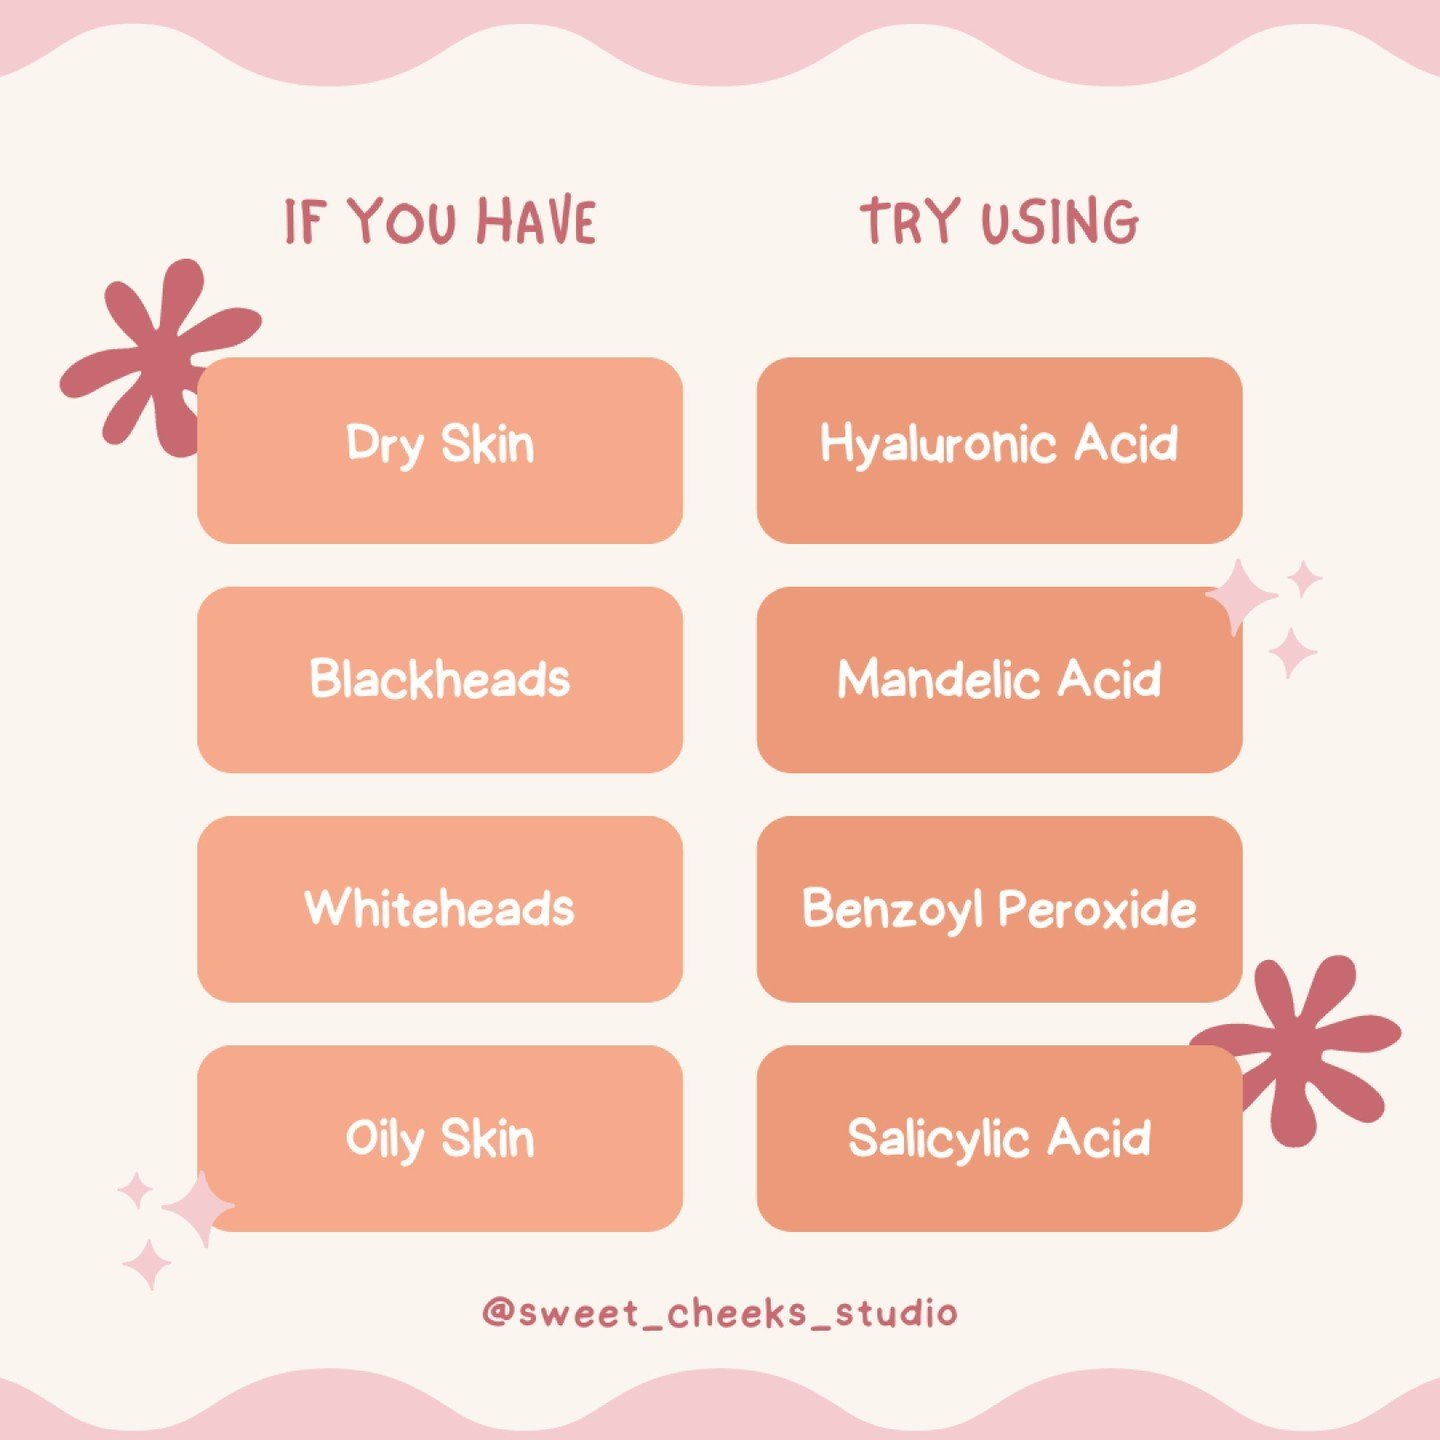 Here are some skincare suggestions for your specific skincare issues! Always remember to consult an esthetician if you're finding dificulties finding the right treatments! 
*
*
*
*
*
#temeculaskincare #temeculafacials #facials #temeculawaxing #waxing